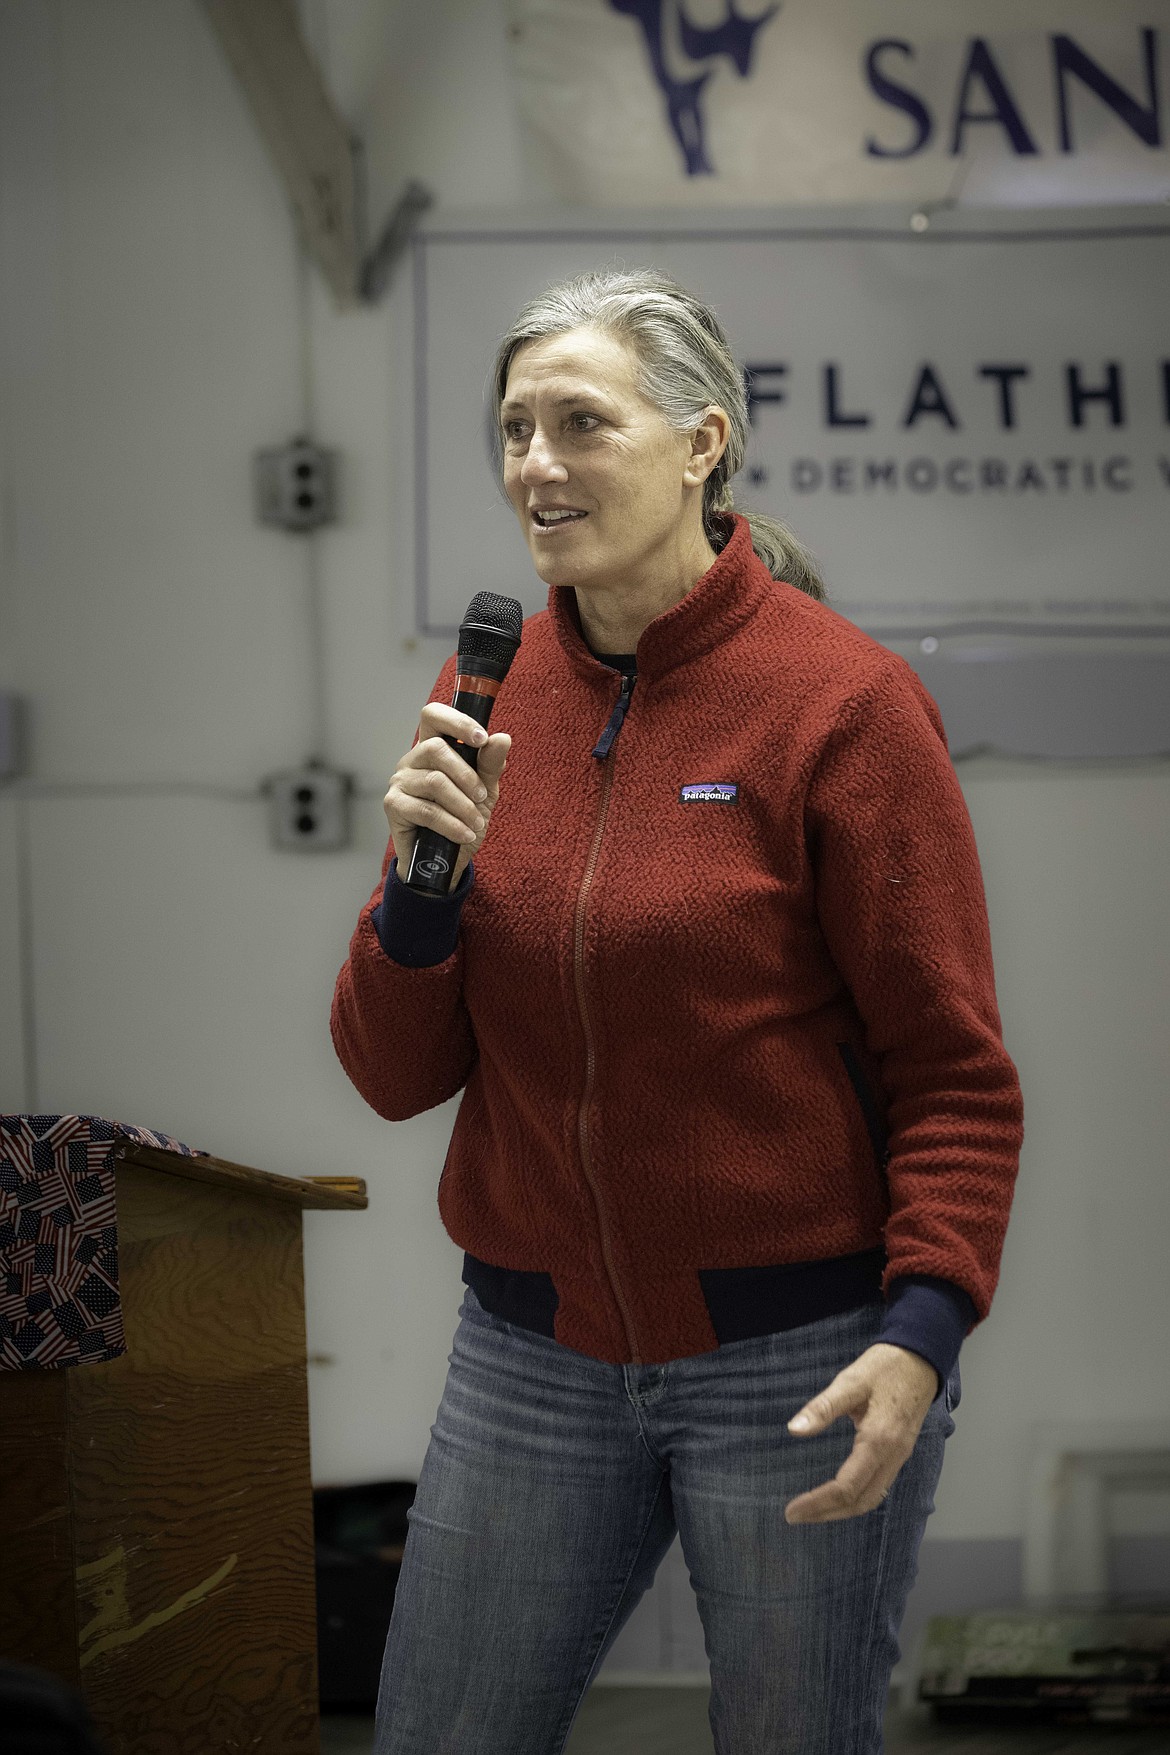 Monica Tranel speaks at a Sanders County Democrats event in Plains last week. Tranel lost her bid for Montana's western district U.S. House seat in the Nov. 8 election. (Tracy Scott/Valley Press)